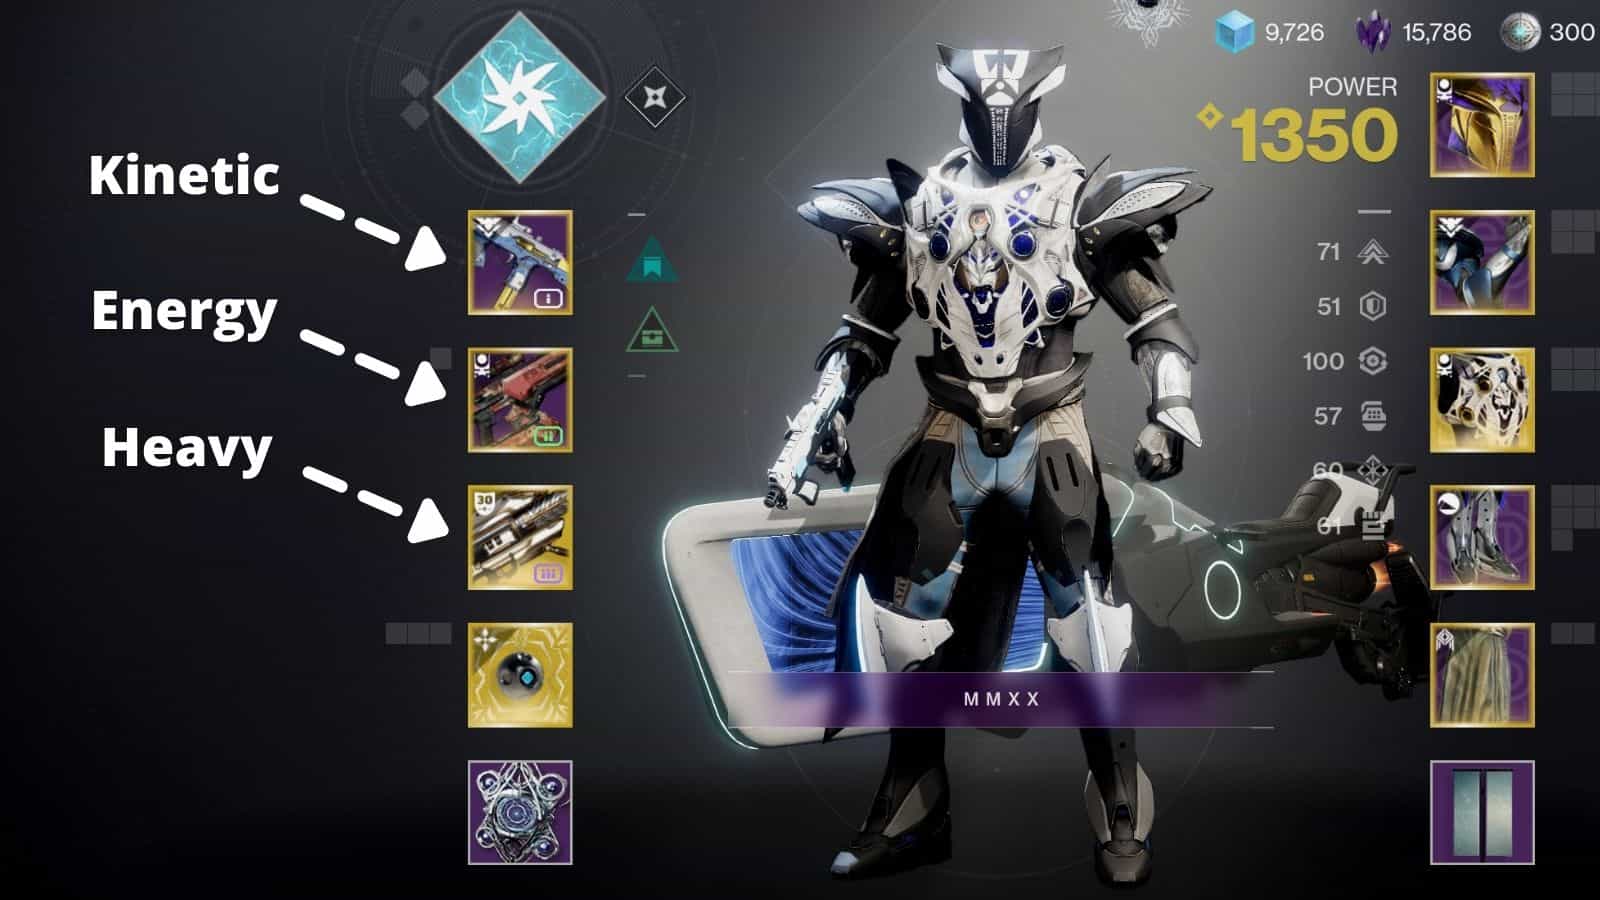 Weapons Slots Destiny 2 featured